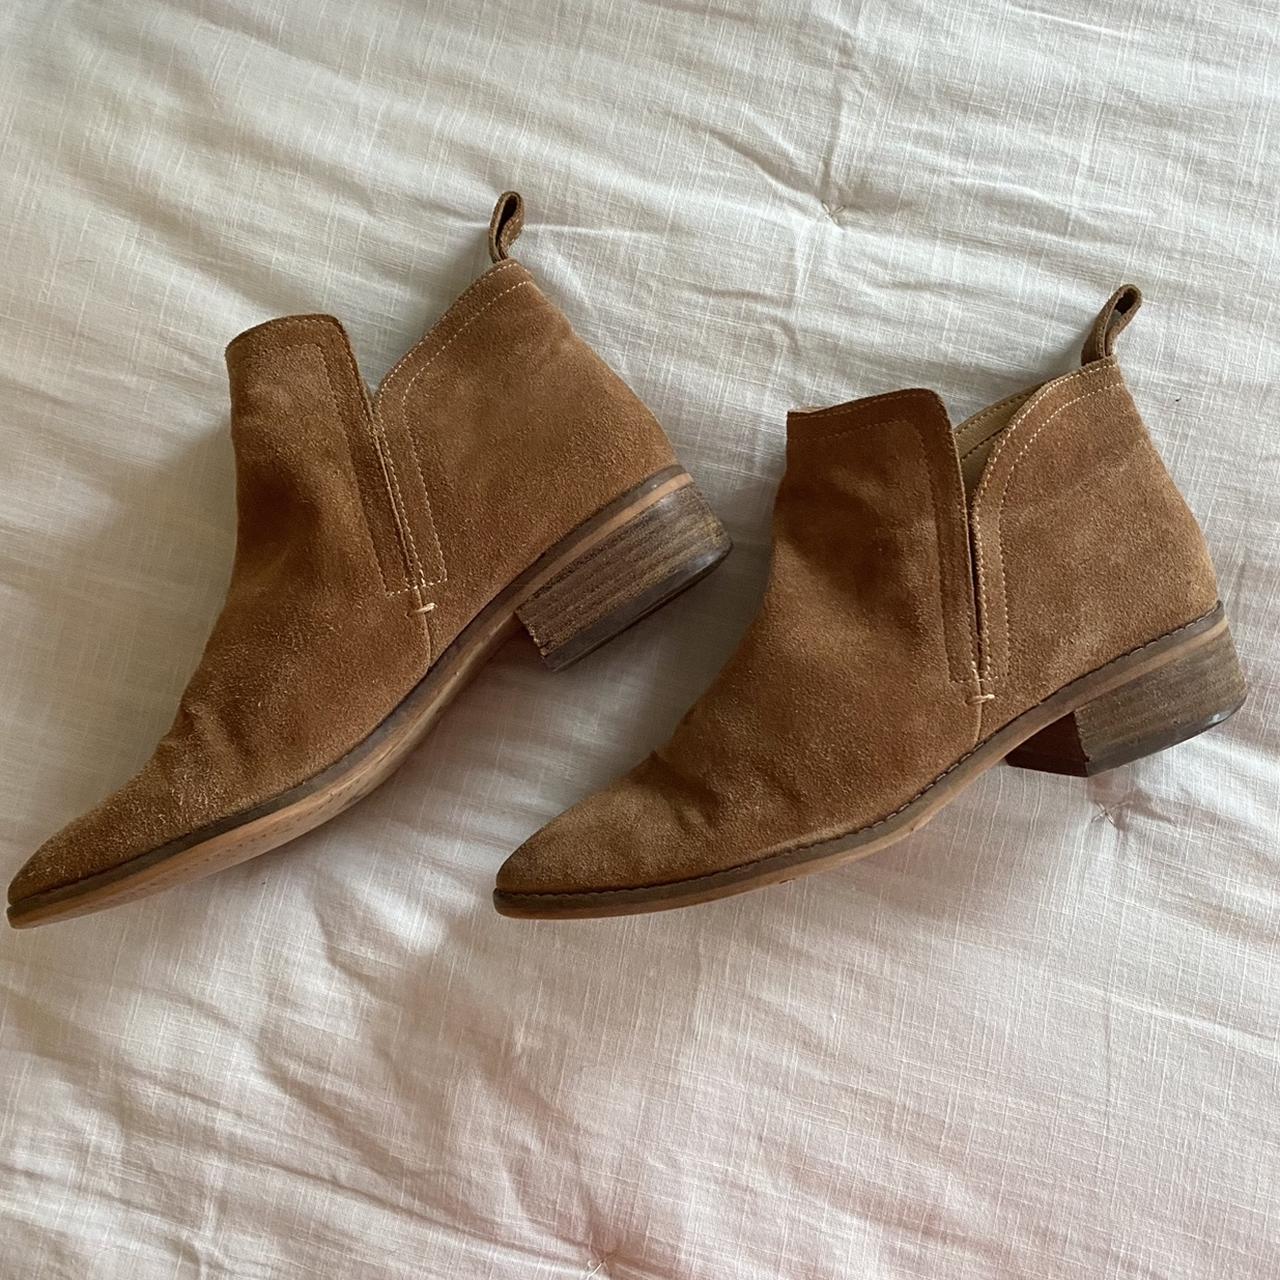 Dolce Vita Women's Tan and Brown Boots